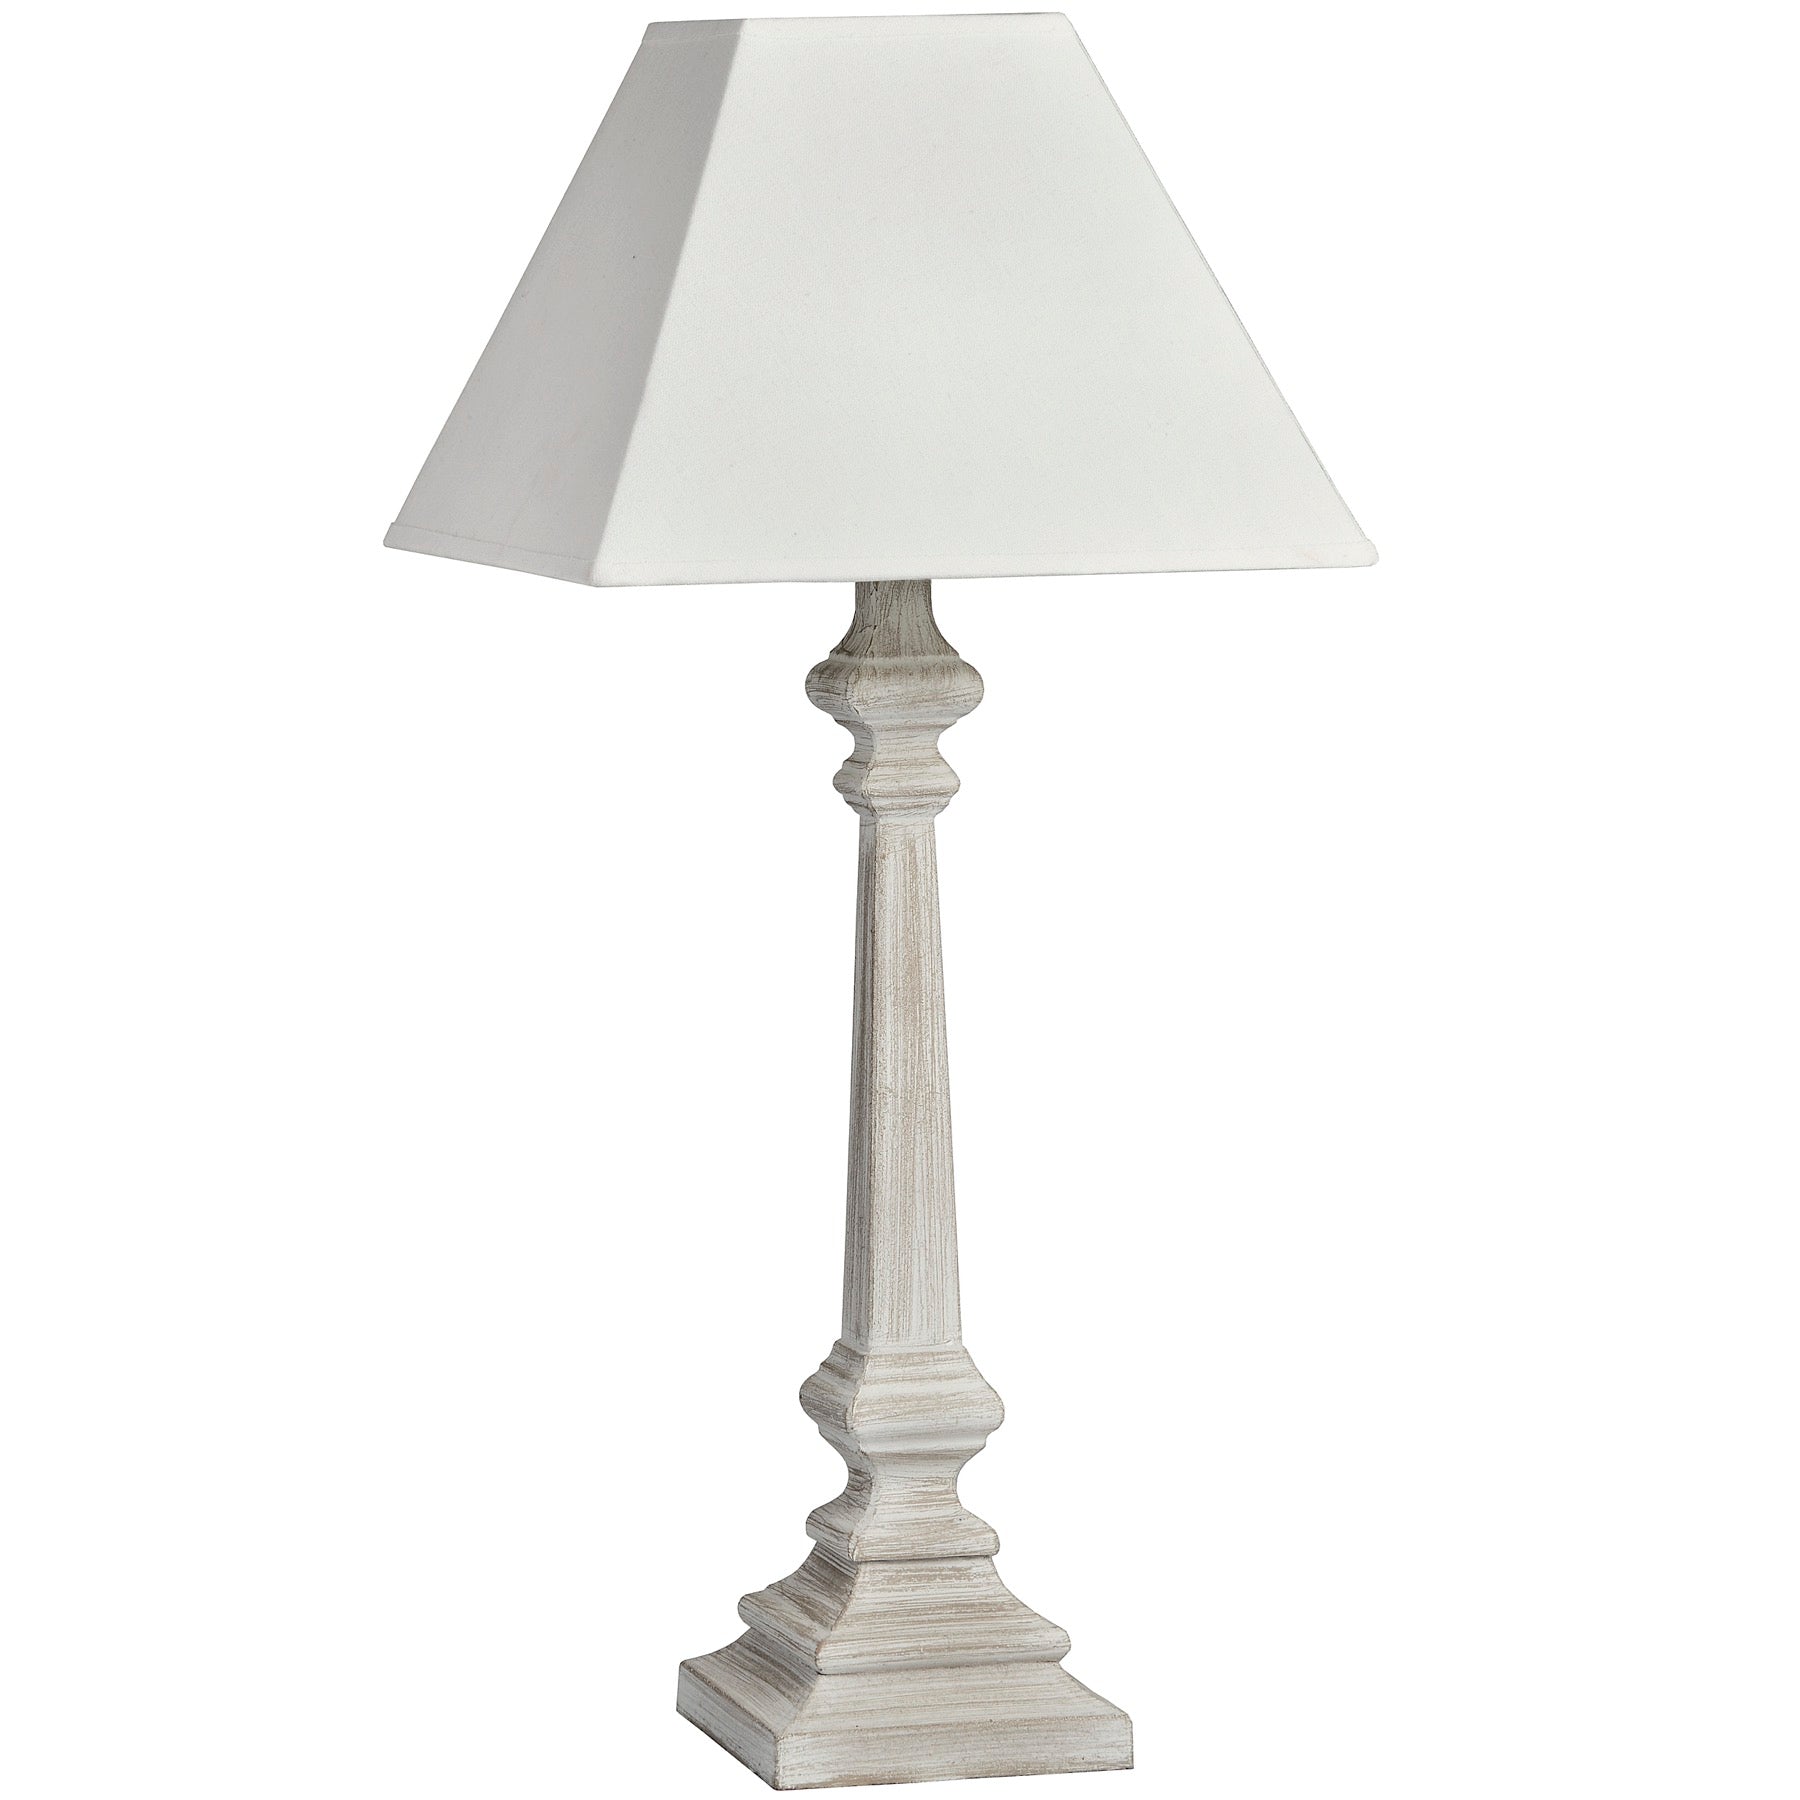 View Pula Table Lamp information